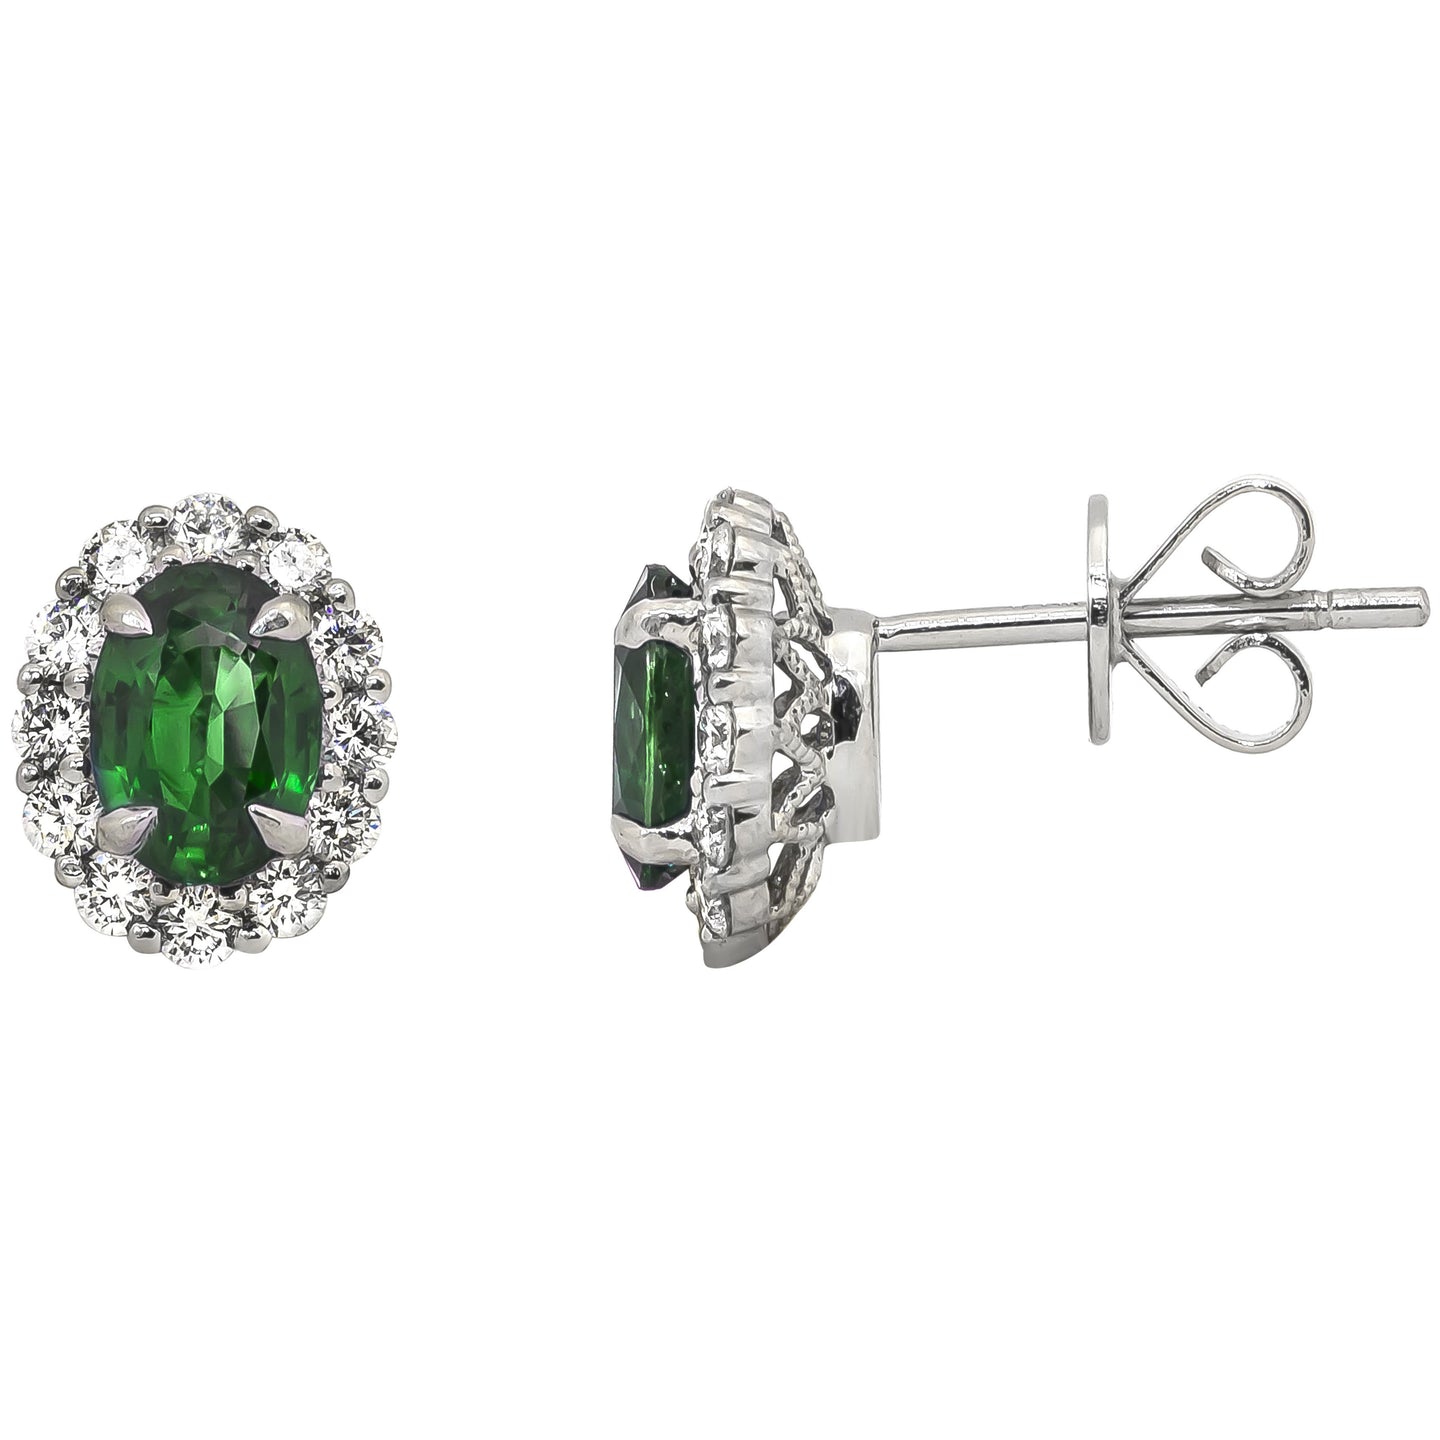 Sabel Collection 14K White Gold Oval Emerald and Diamond Halo Stud Earrings